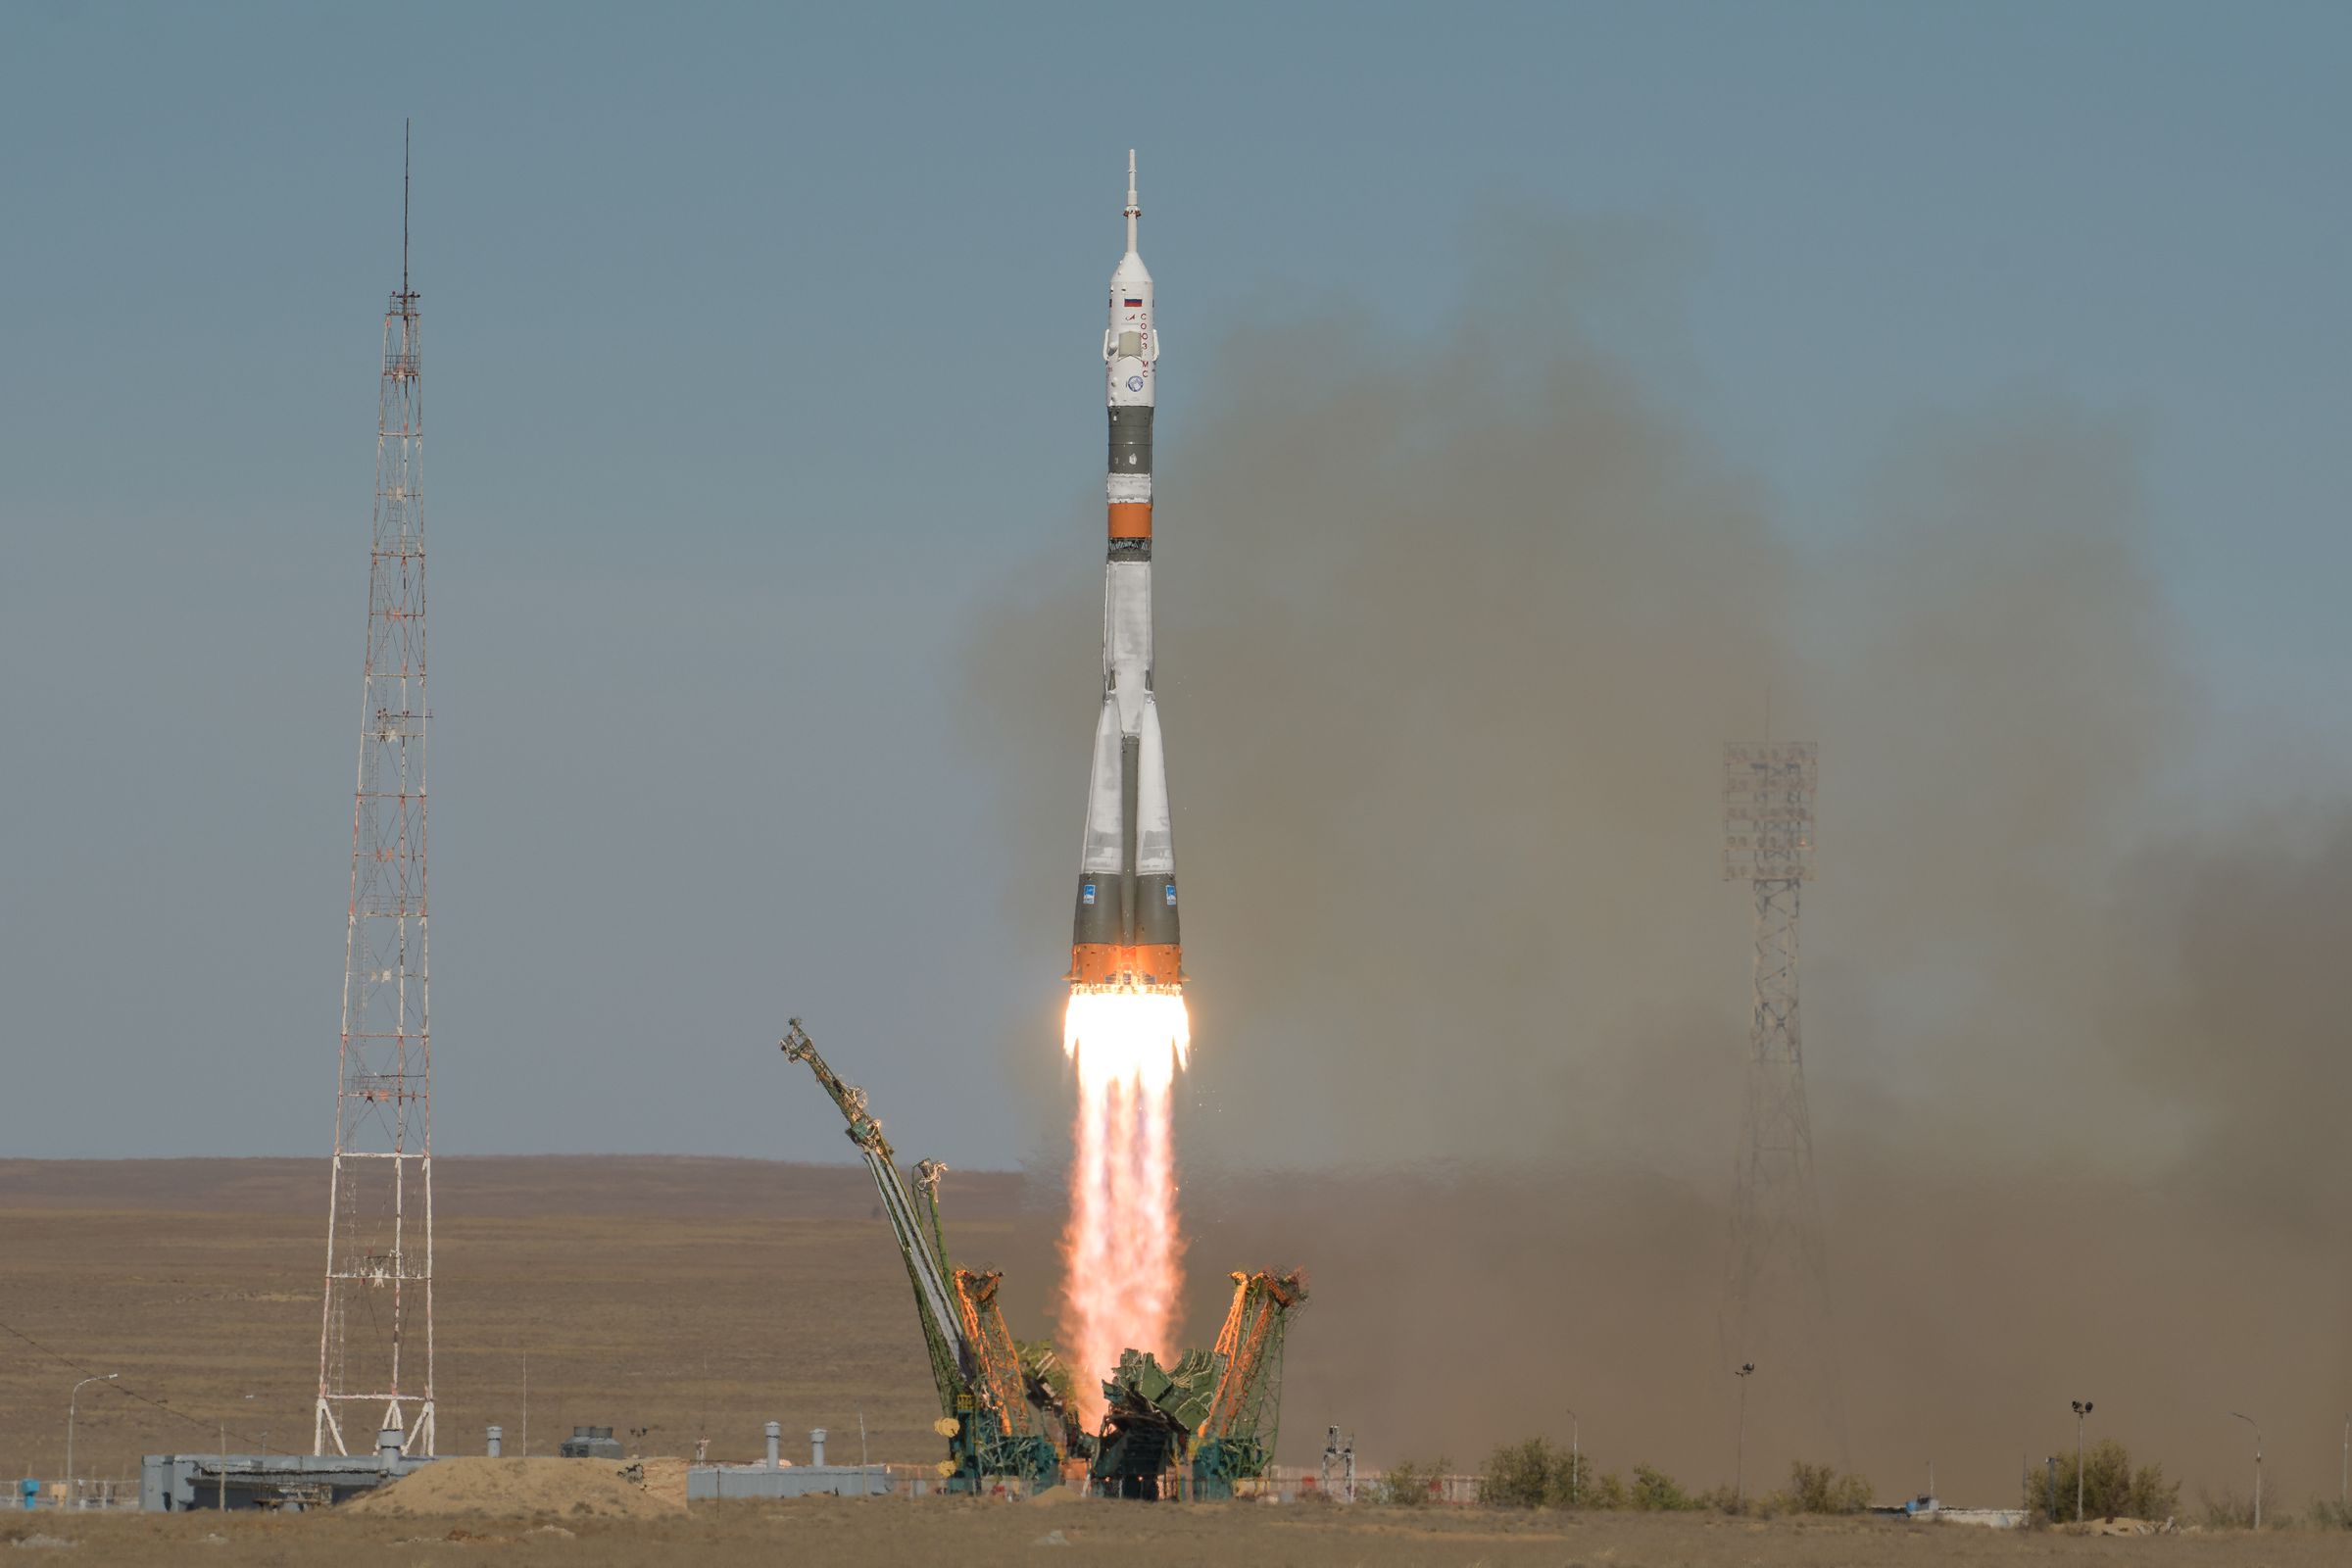 The Russian Soyuz rocket lifts off carrying Nick Hague and Alexey Ovchinin